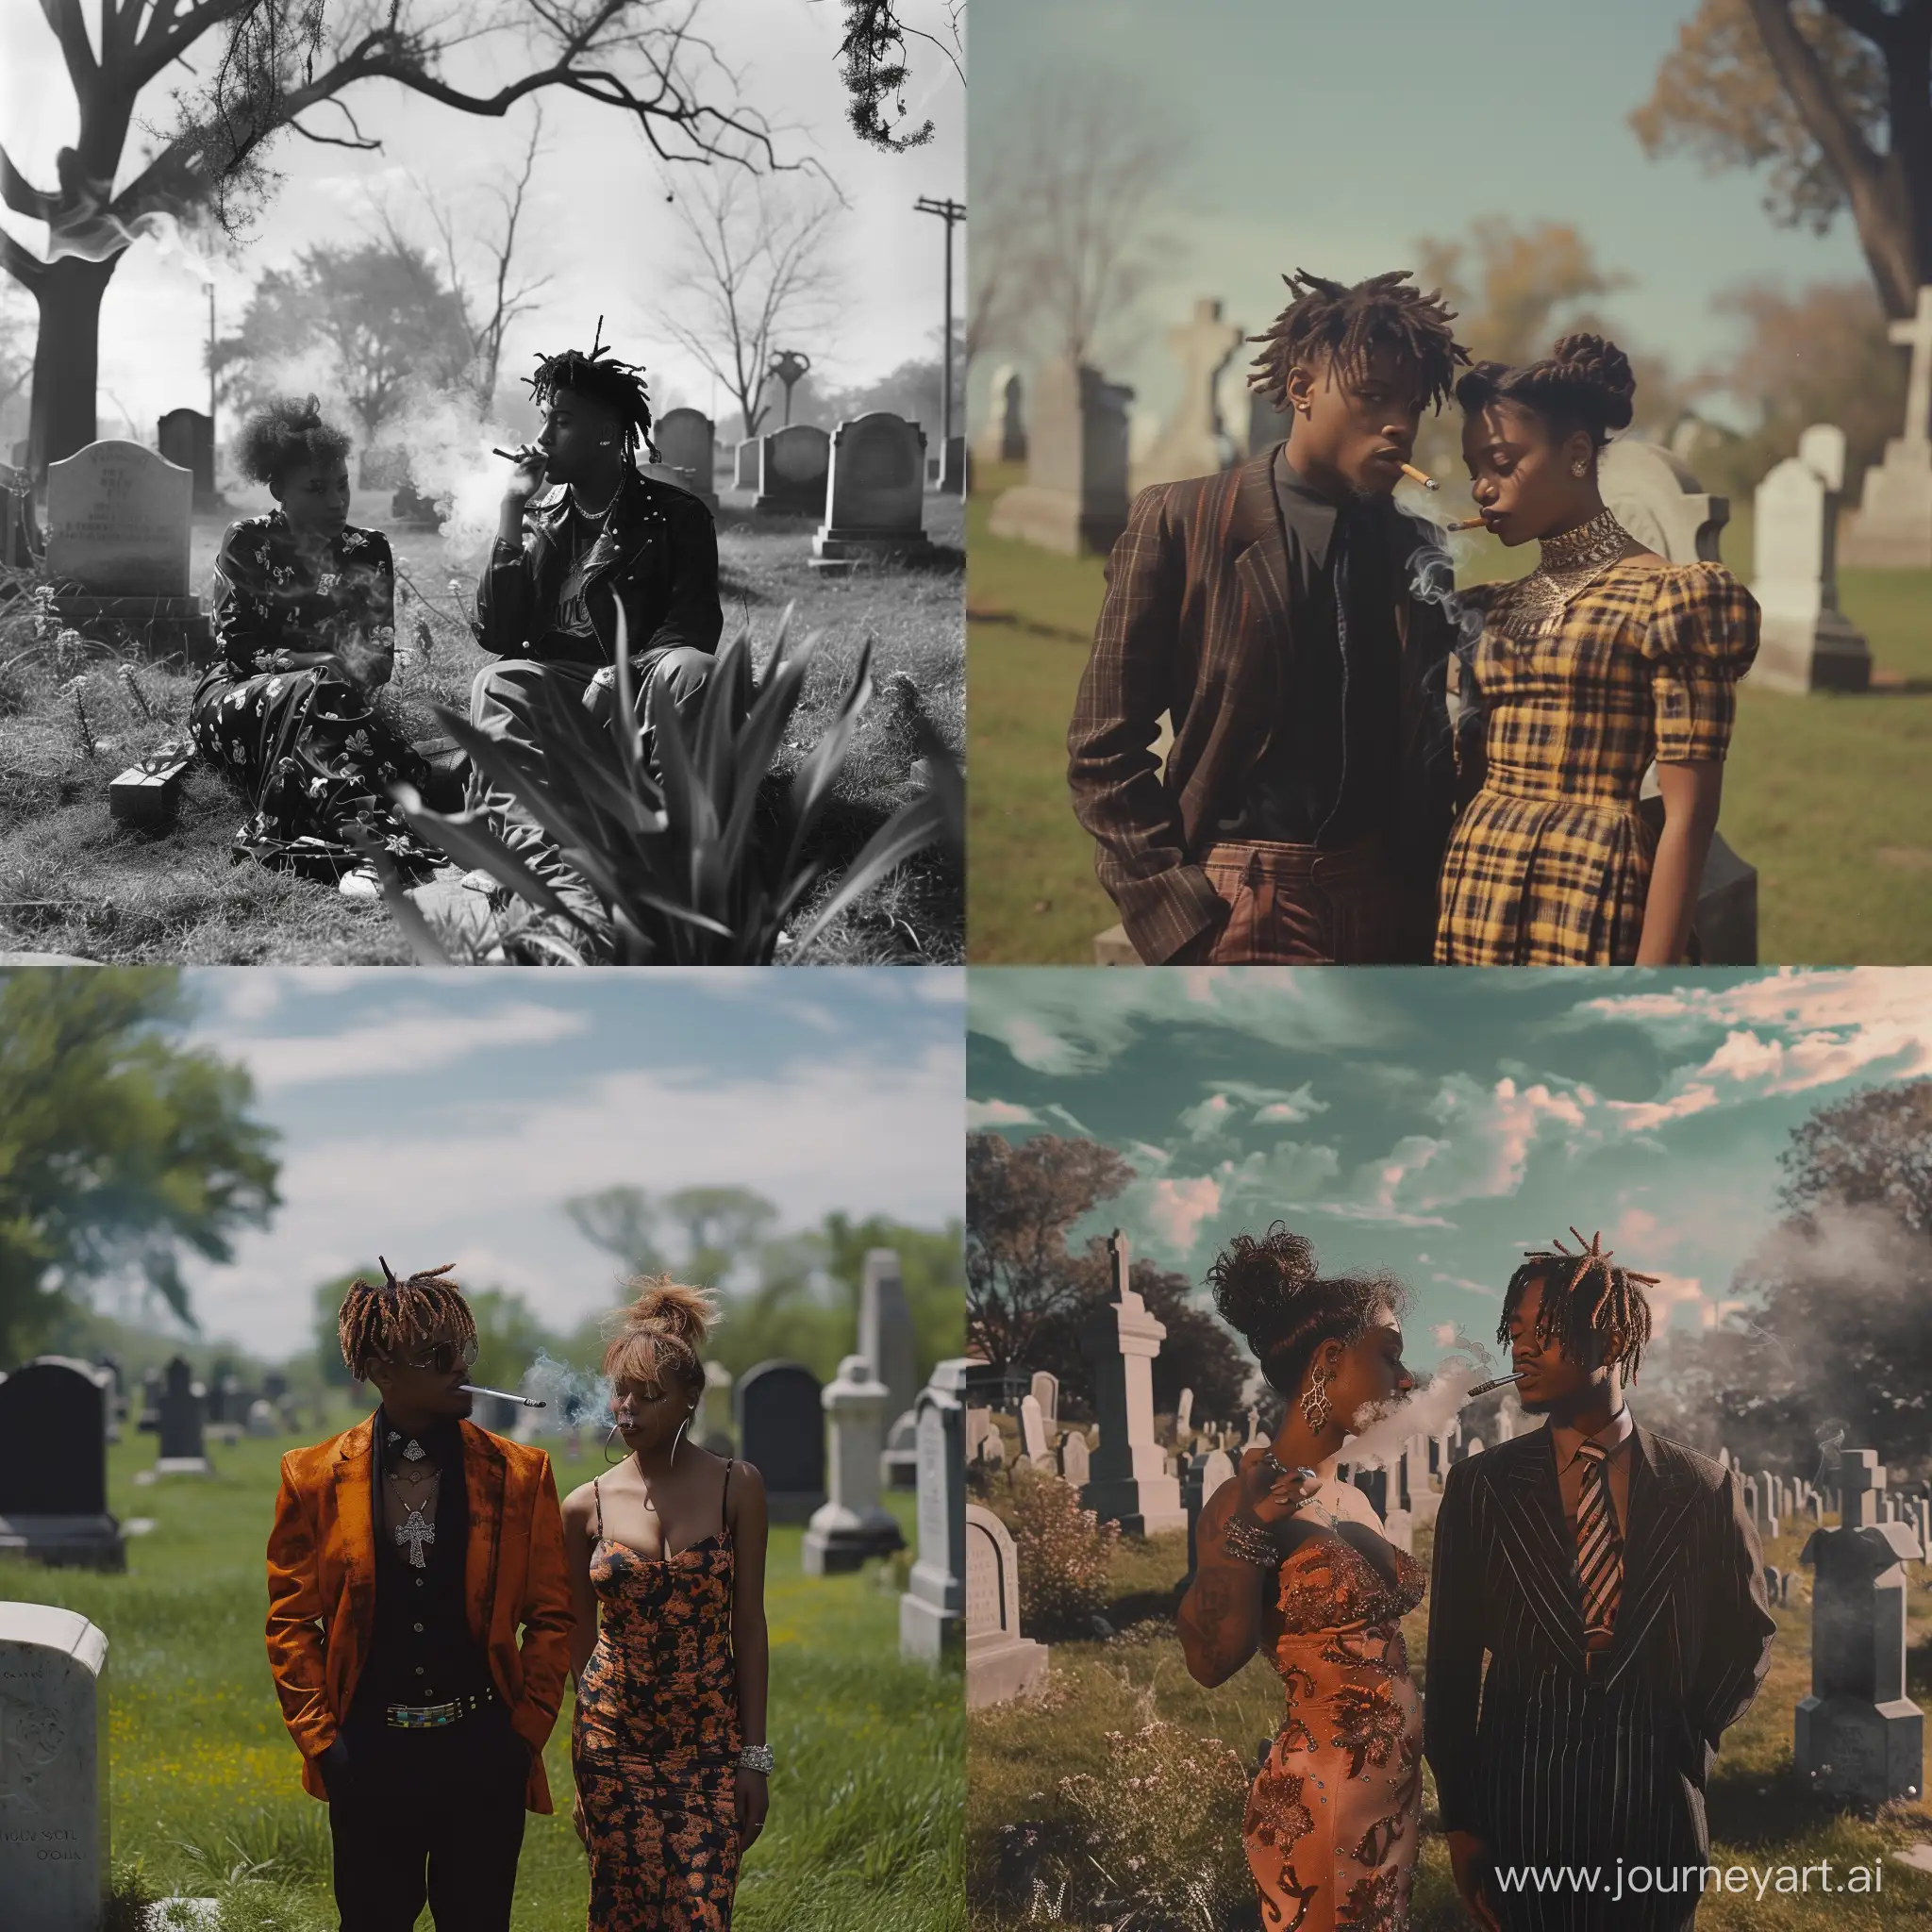 Vintage-Aesthetic-Juice-WRLD-and-Woman-Share-a-Moment-in-1950s-Cemetery